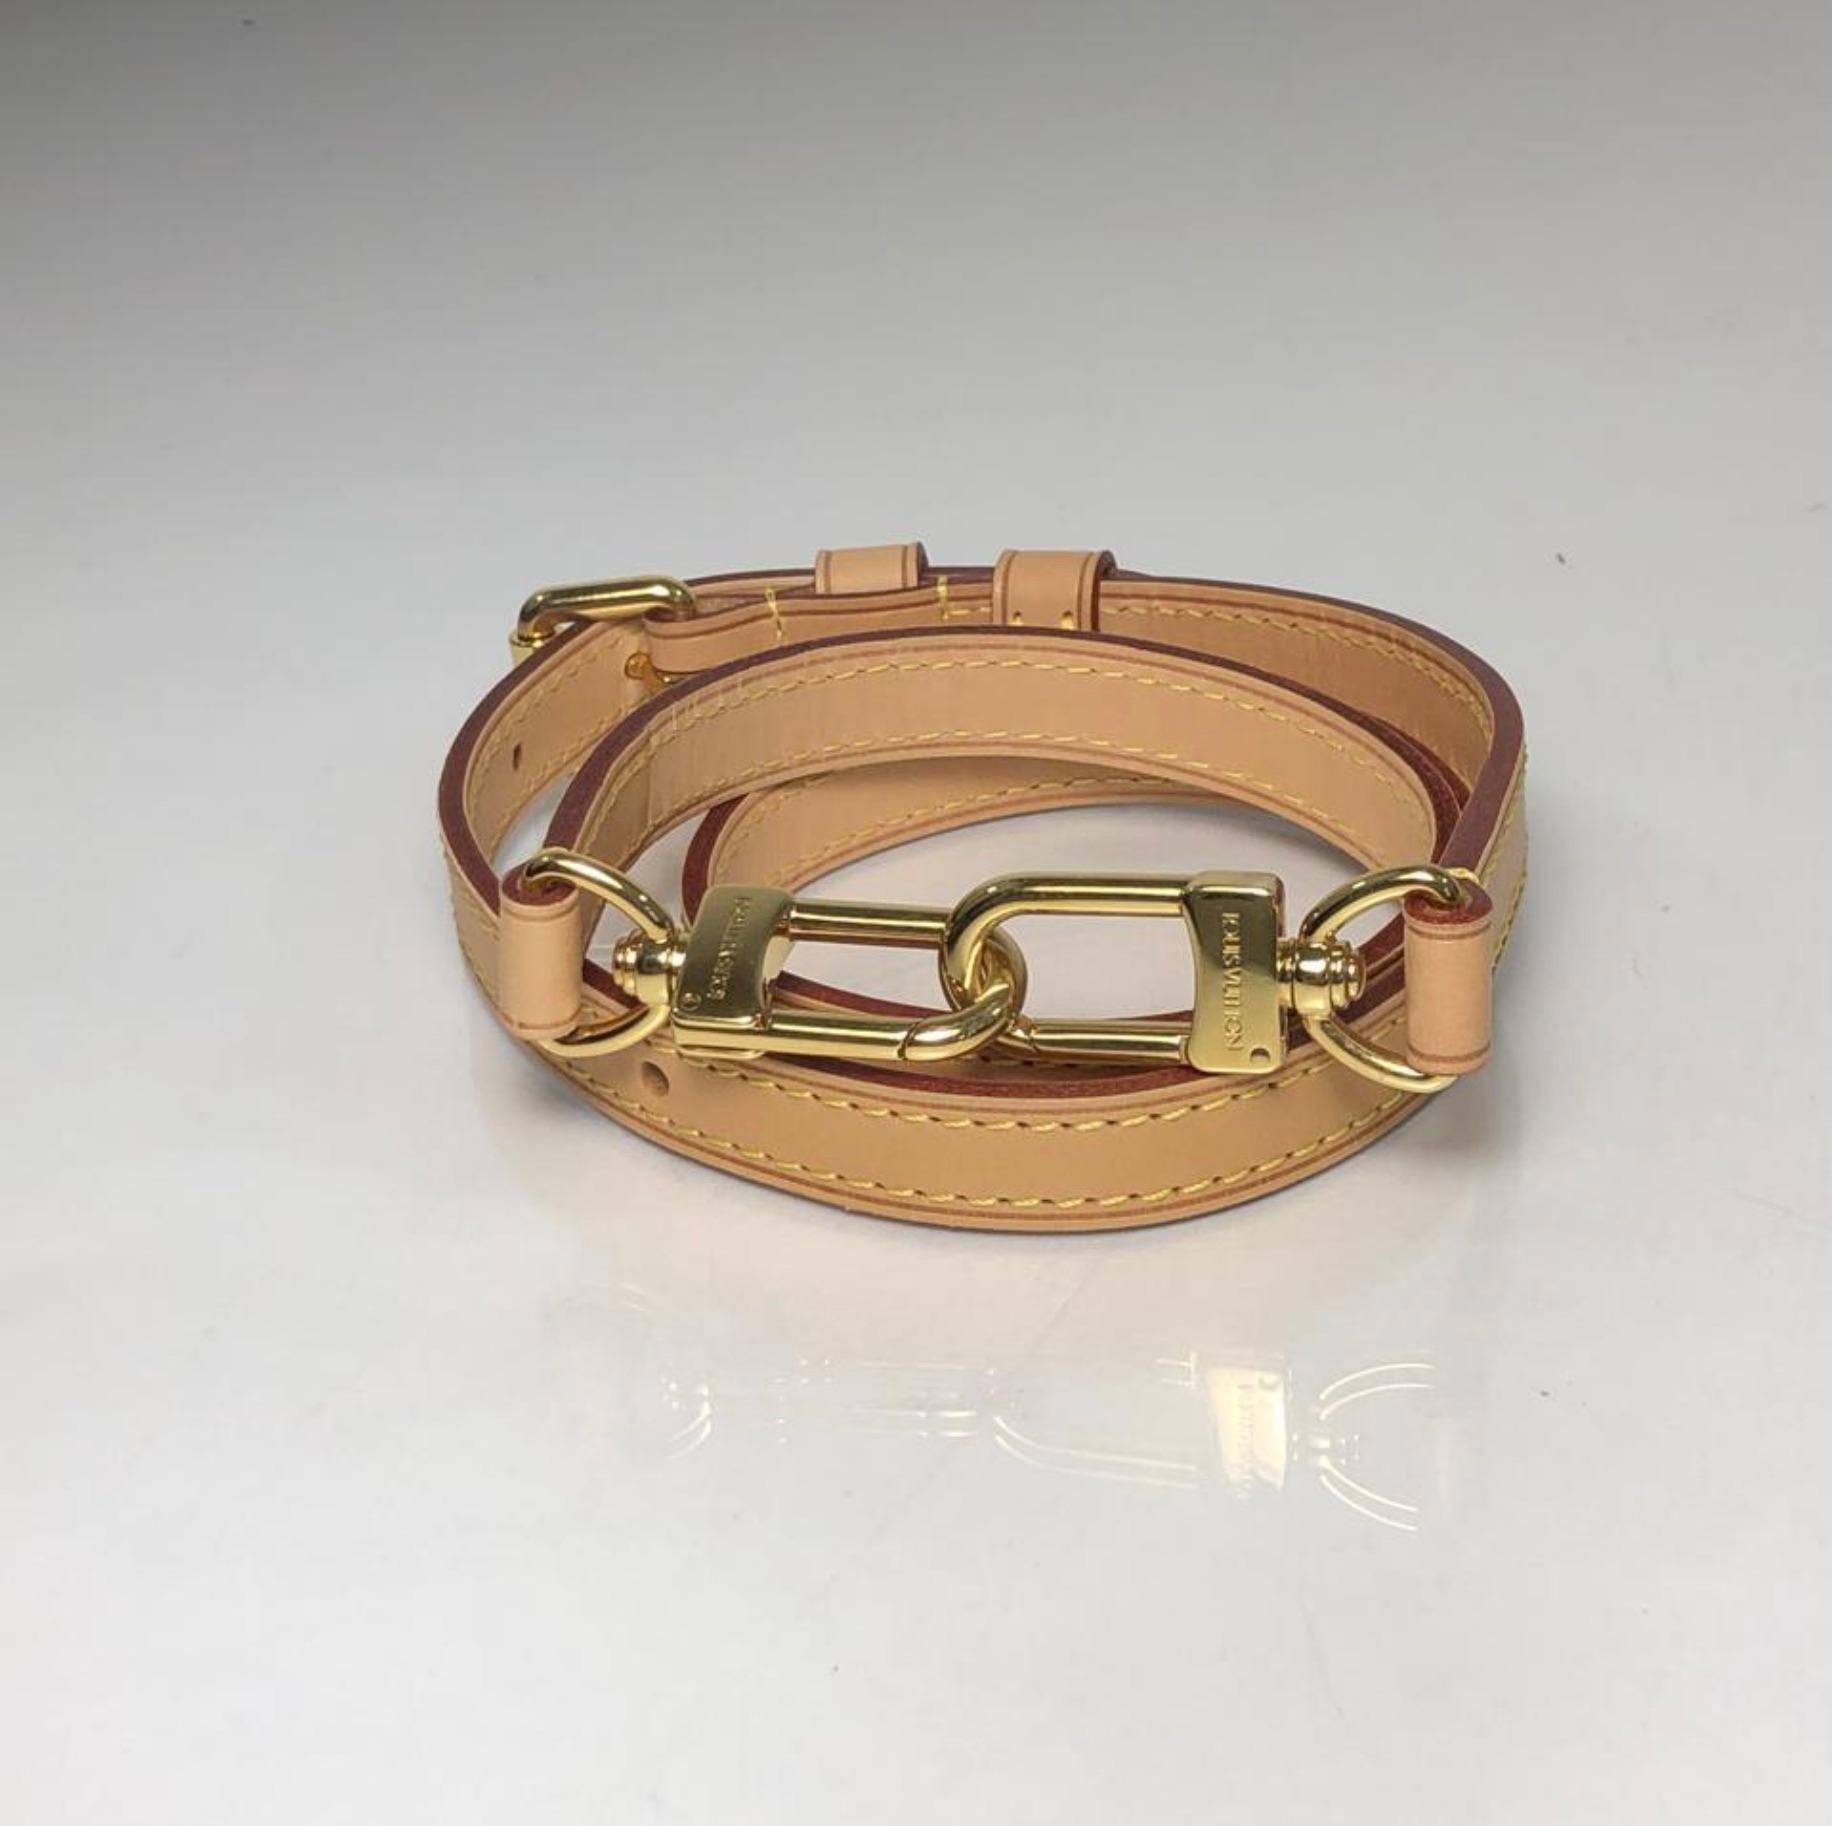 MODEL - Louis Vuitton Vachette Strap - Shoulder (Narrow and Adjustable)

CONDITION - Exceptional. Light vachette with no watermarks, no dryness and no cracking. Bright and shiny hardware with no tarnishing or chipping. No rips, holes, tears, stains